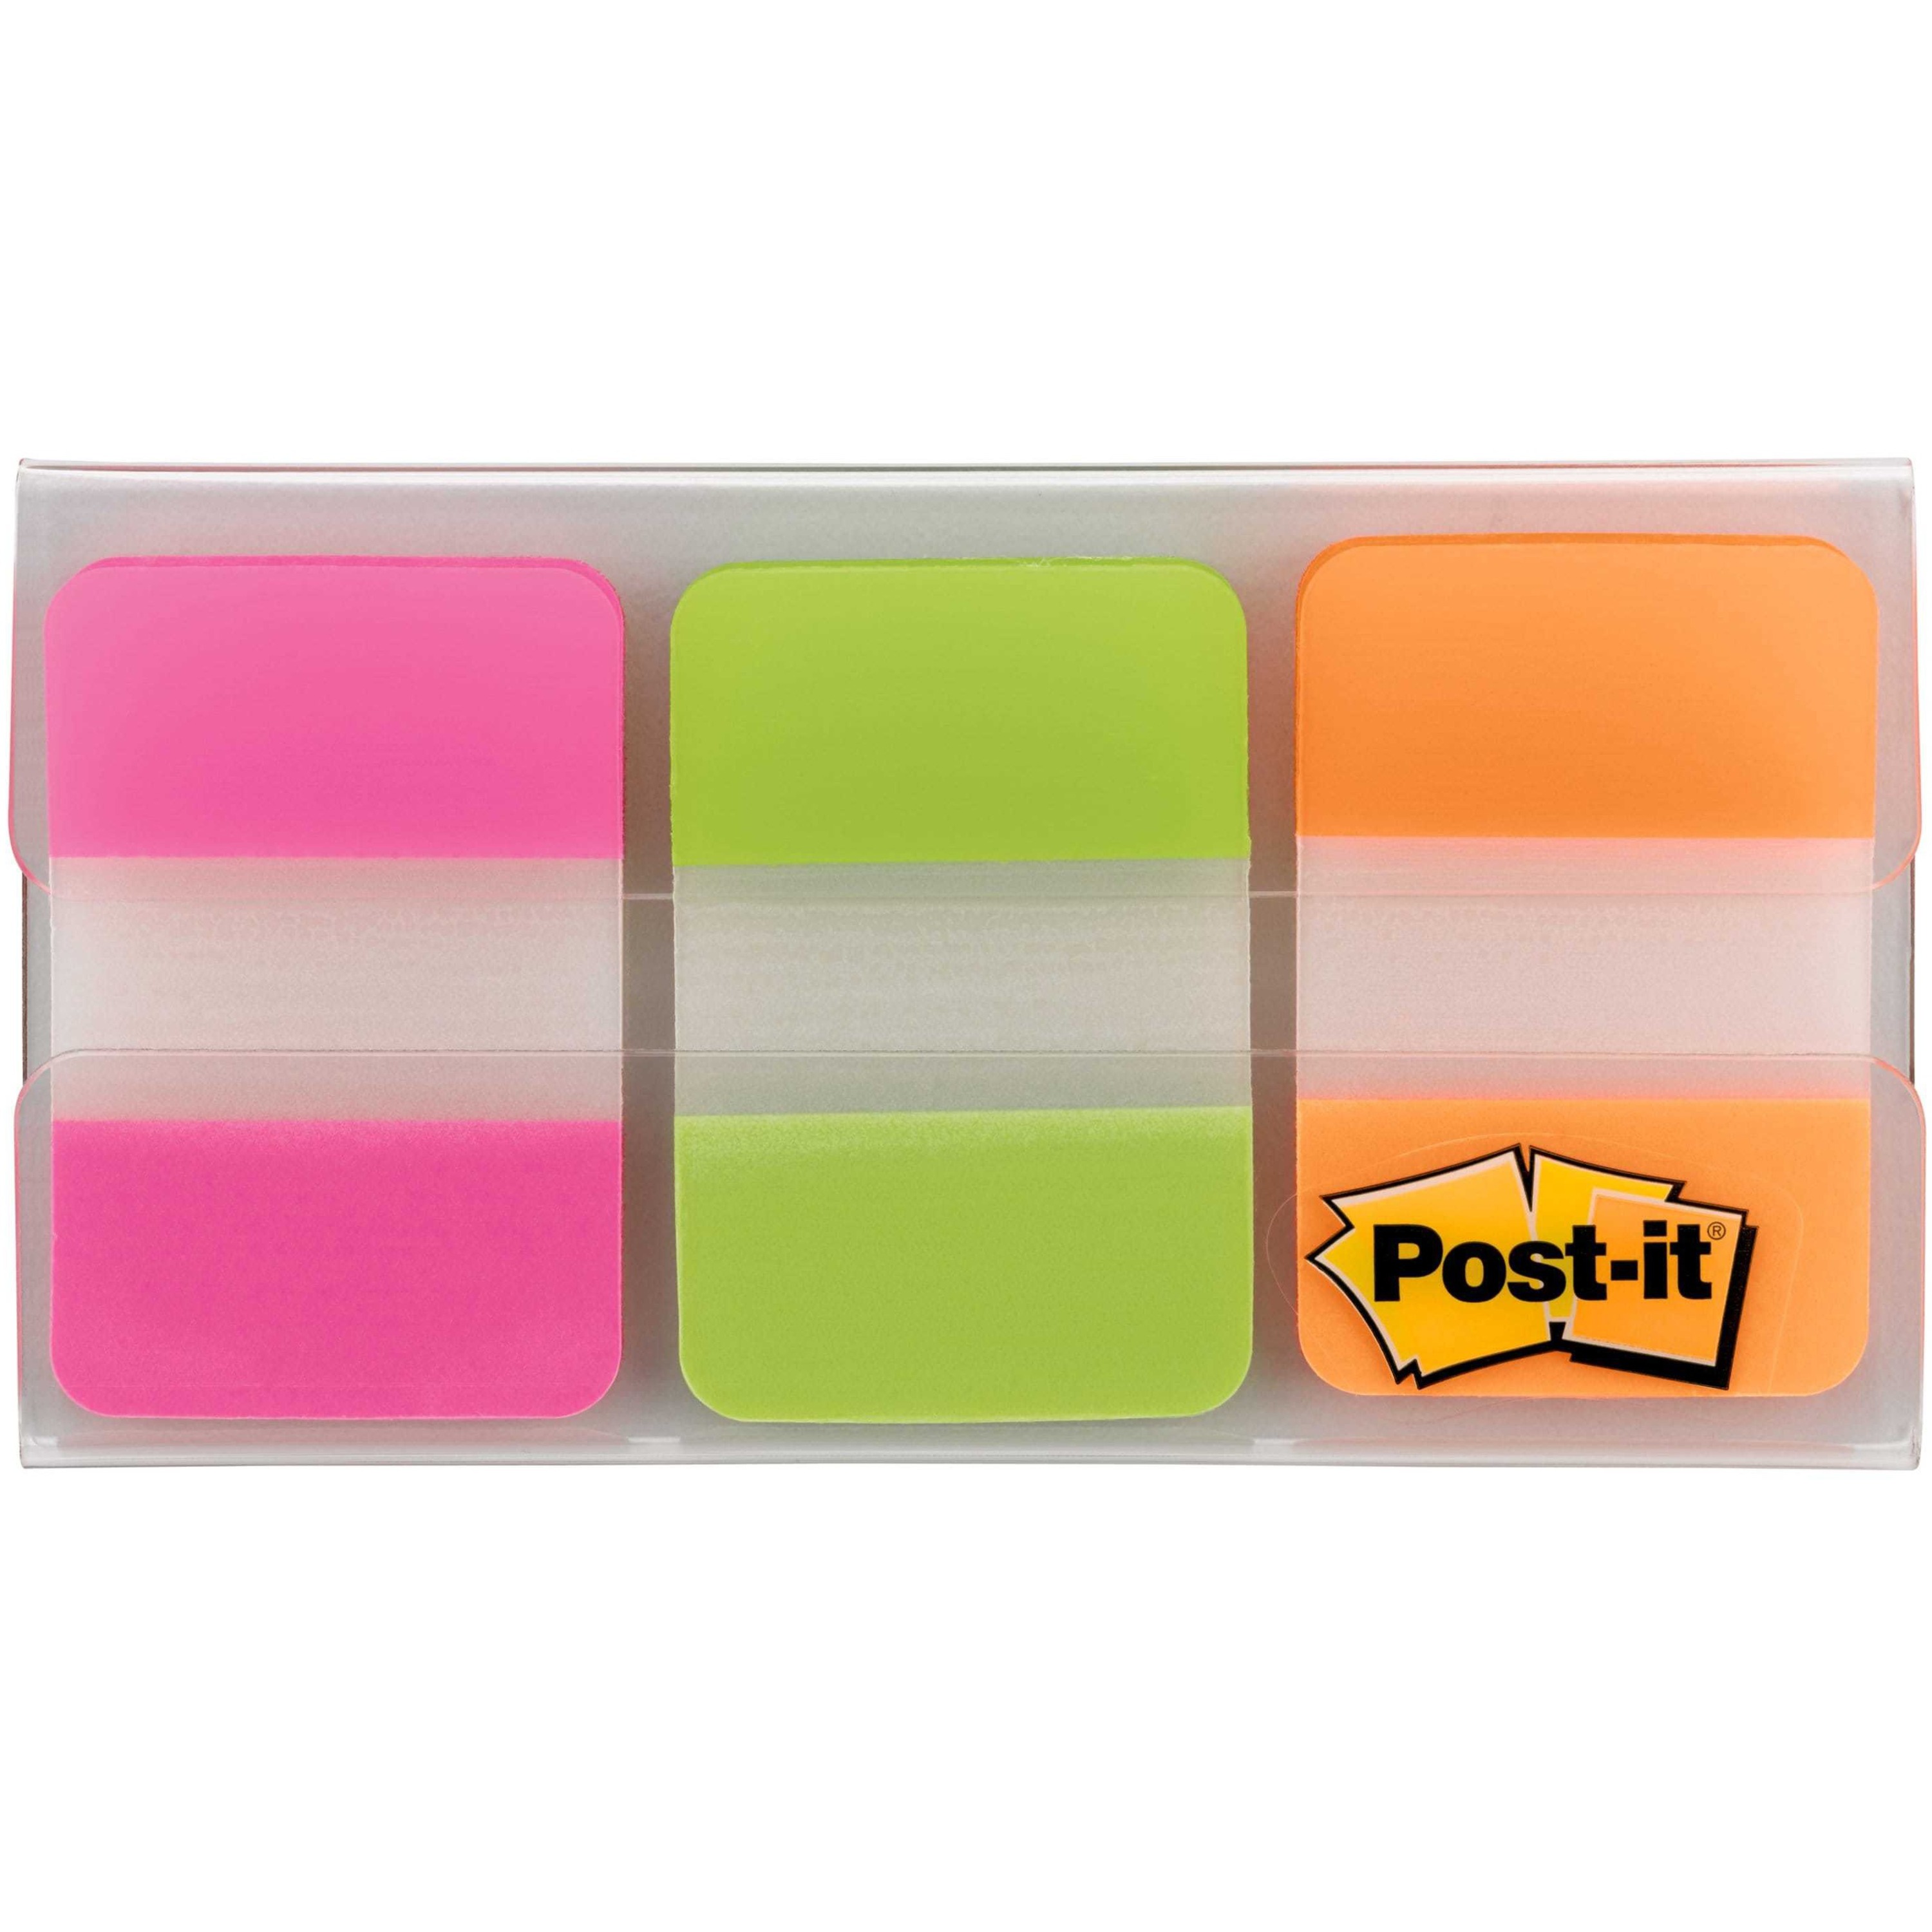 22/Color Post-it Tabs 88/Dispenser 686-AYPV1IN Aqua Yellow Violet 1 in Solid Pink 